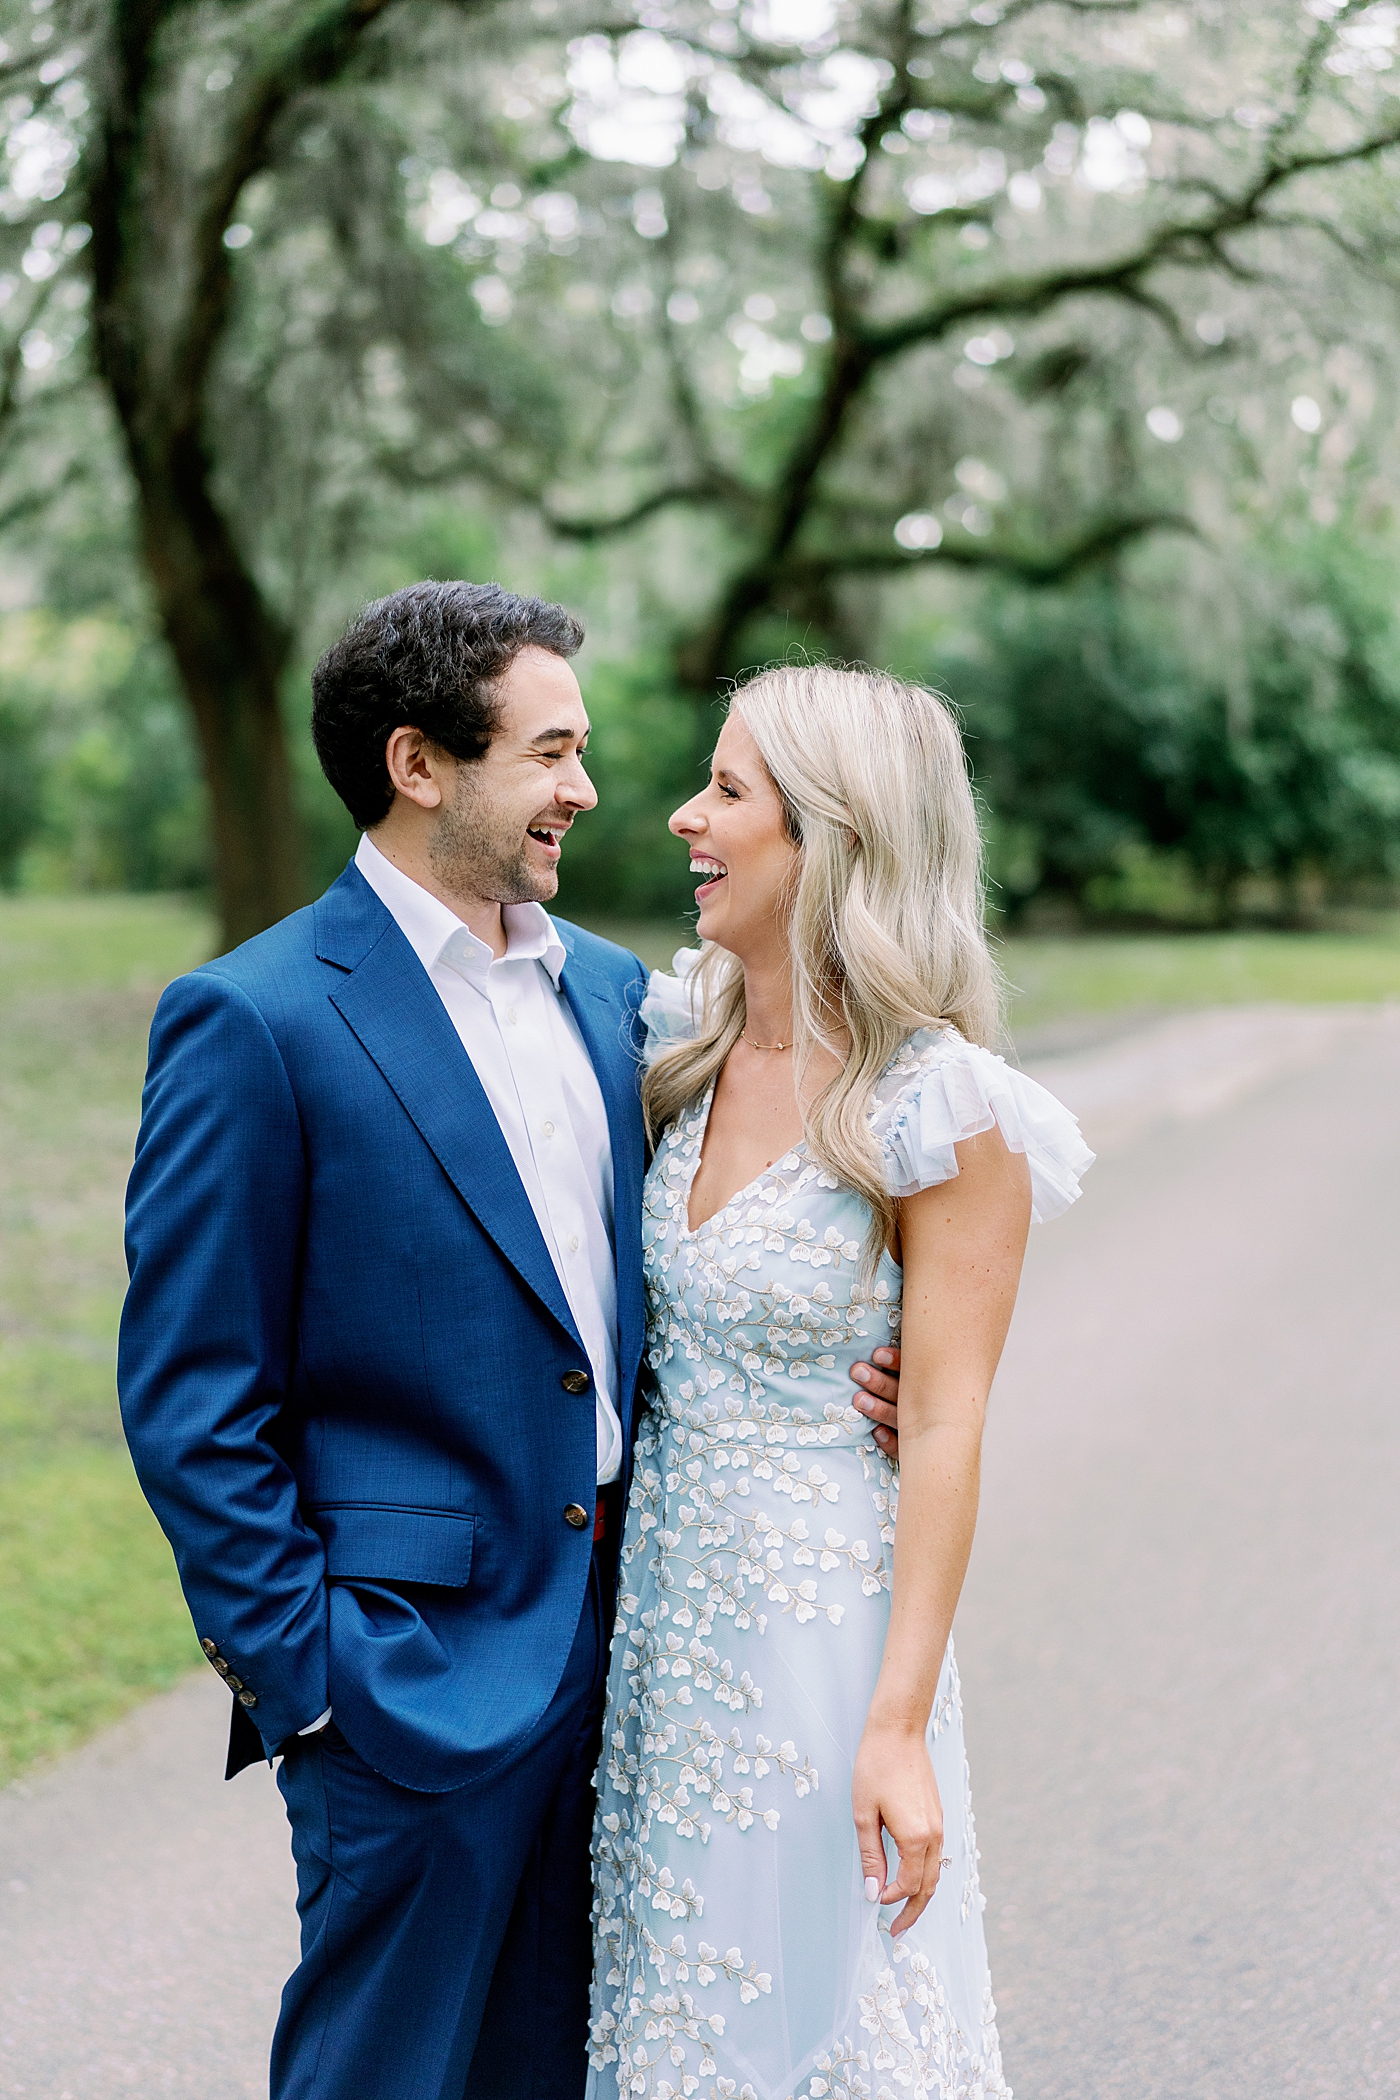 Couple laughing together | Image by Annie Laura Photo